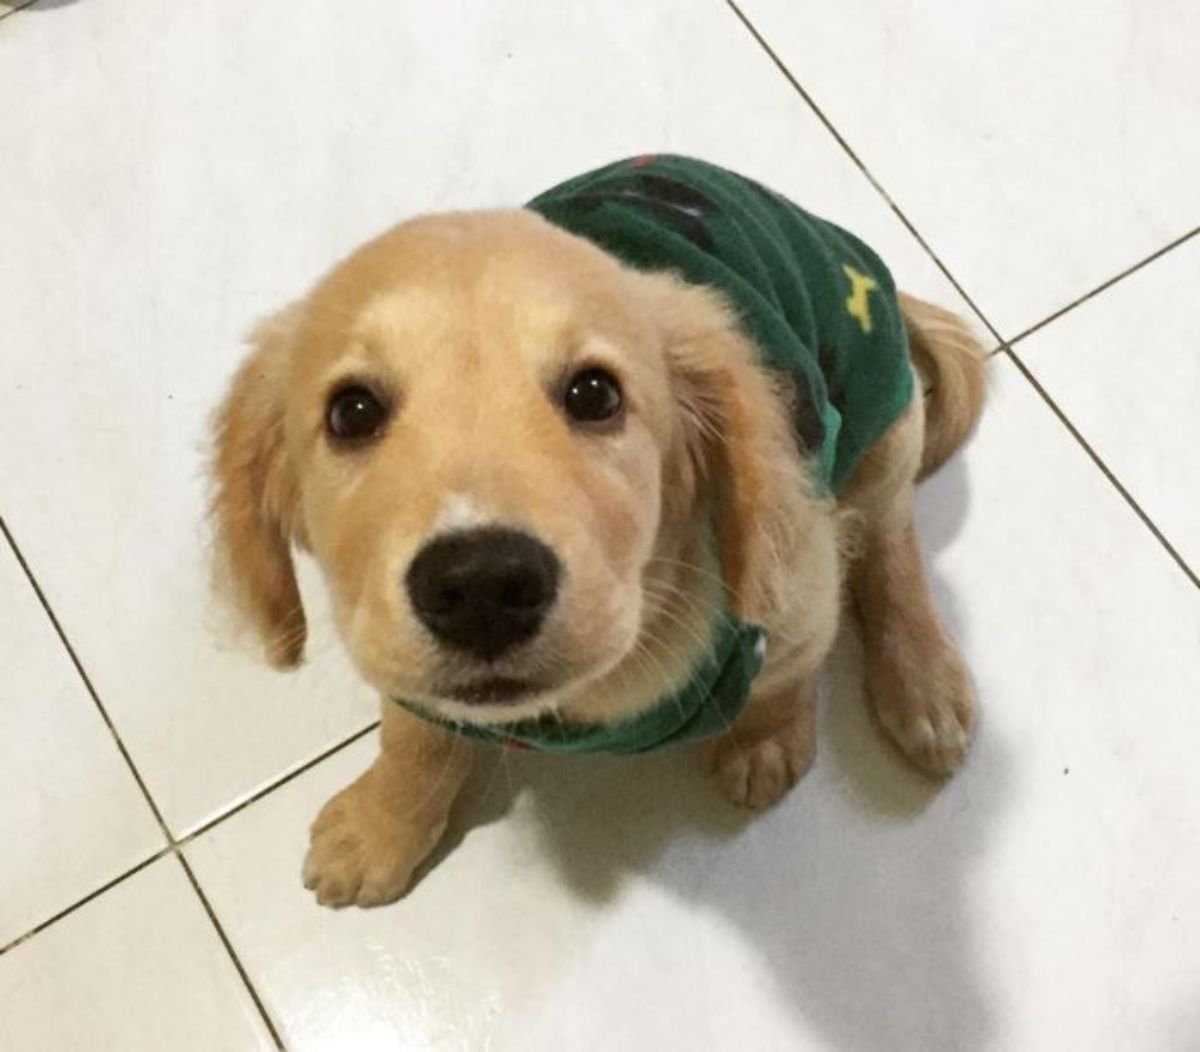 cute golden spanador puppy sitting on the floor wearing its green sweater